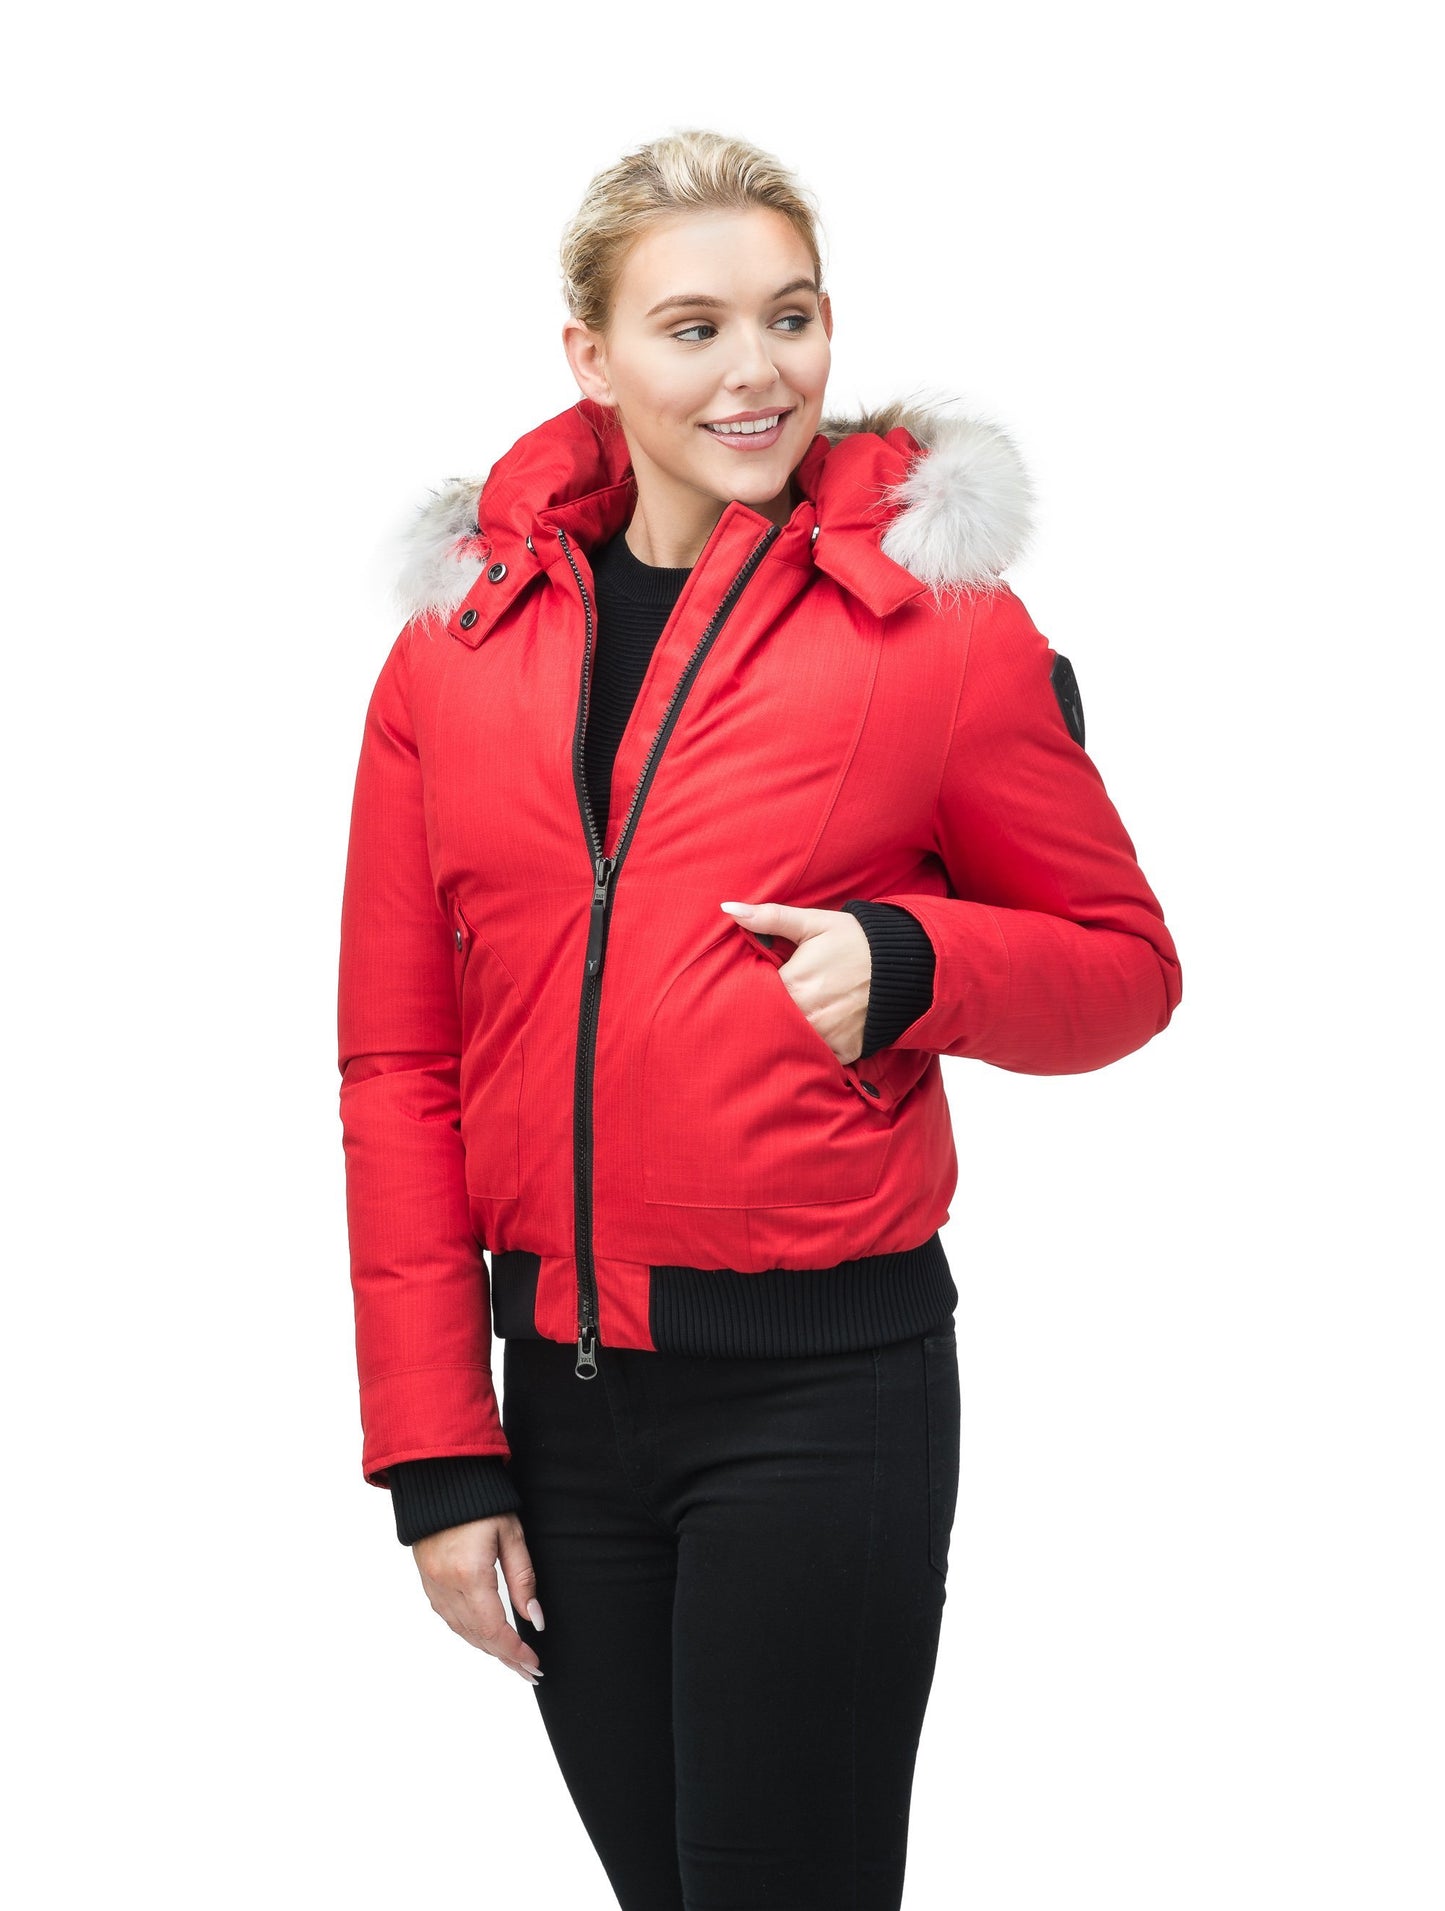 Women's bomber style down filled jacket with a removable hood and fur trim in CH Red